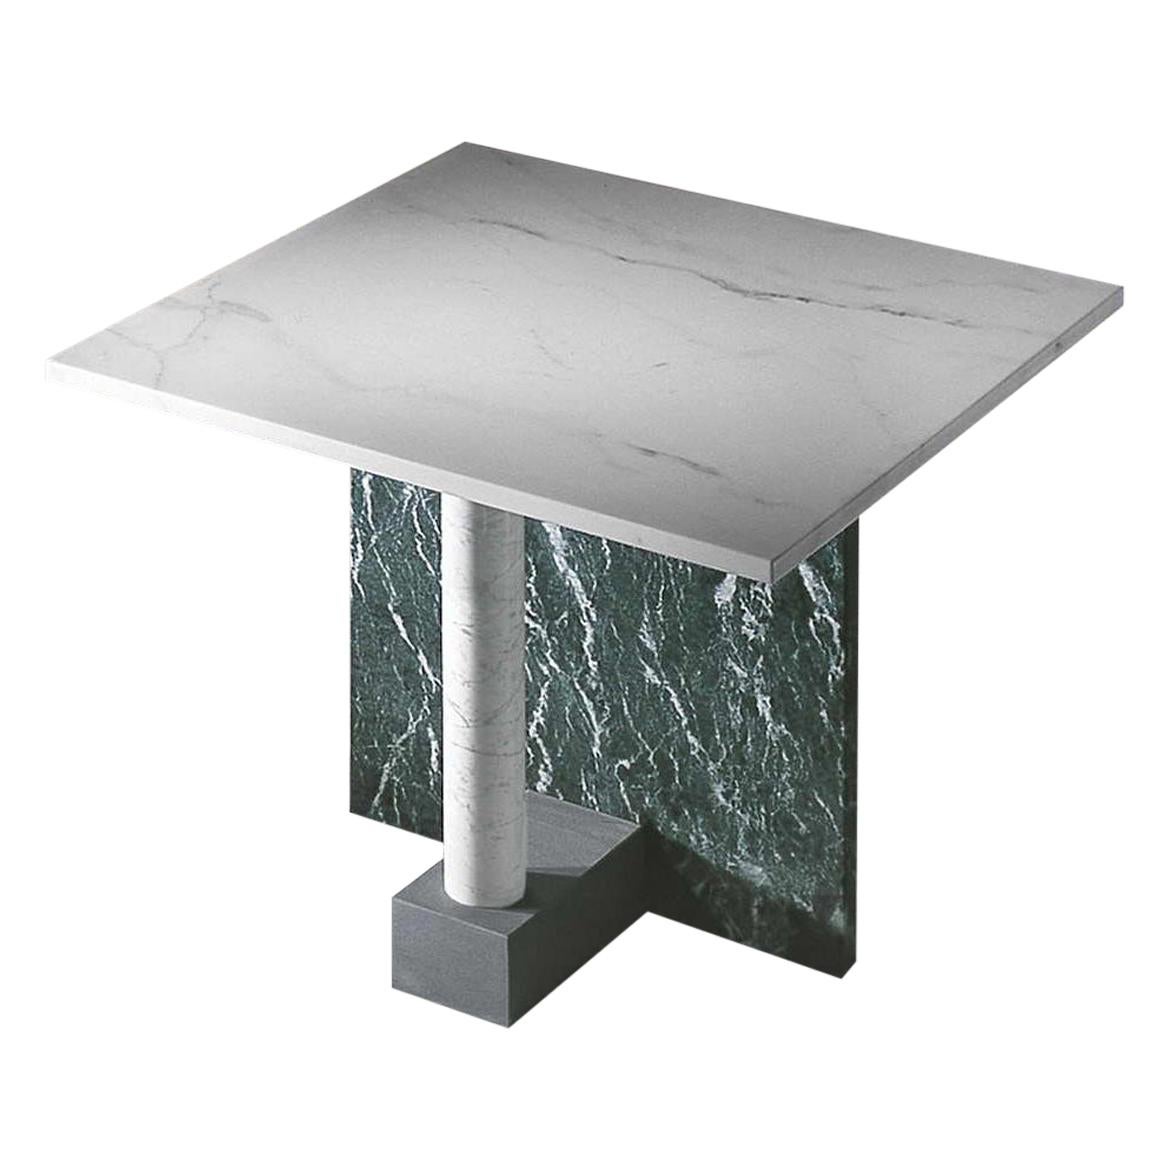 21st Century by Arch. M.Zanini "MESAVERDE" Square Marble Coffee Table For Sale